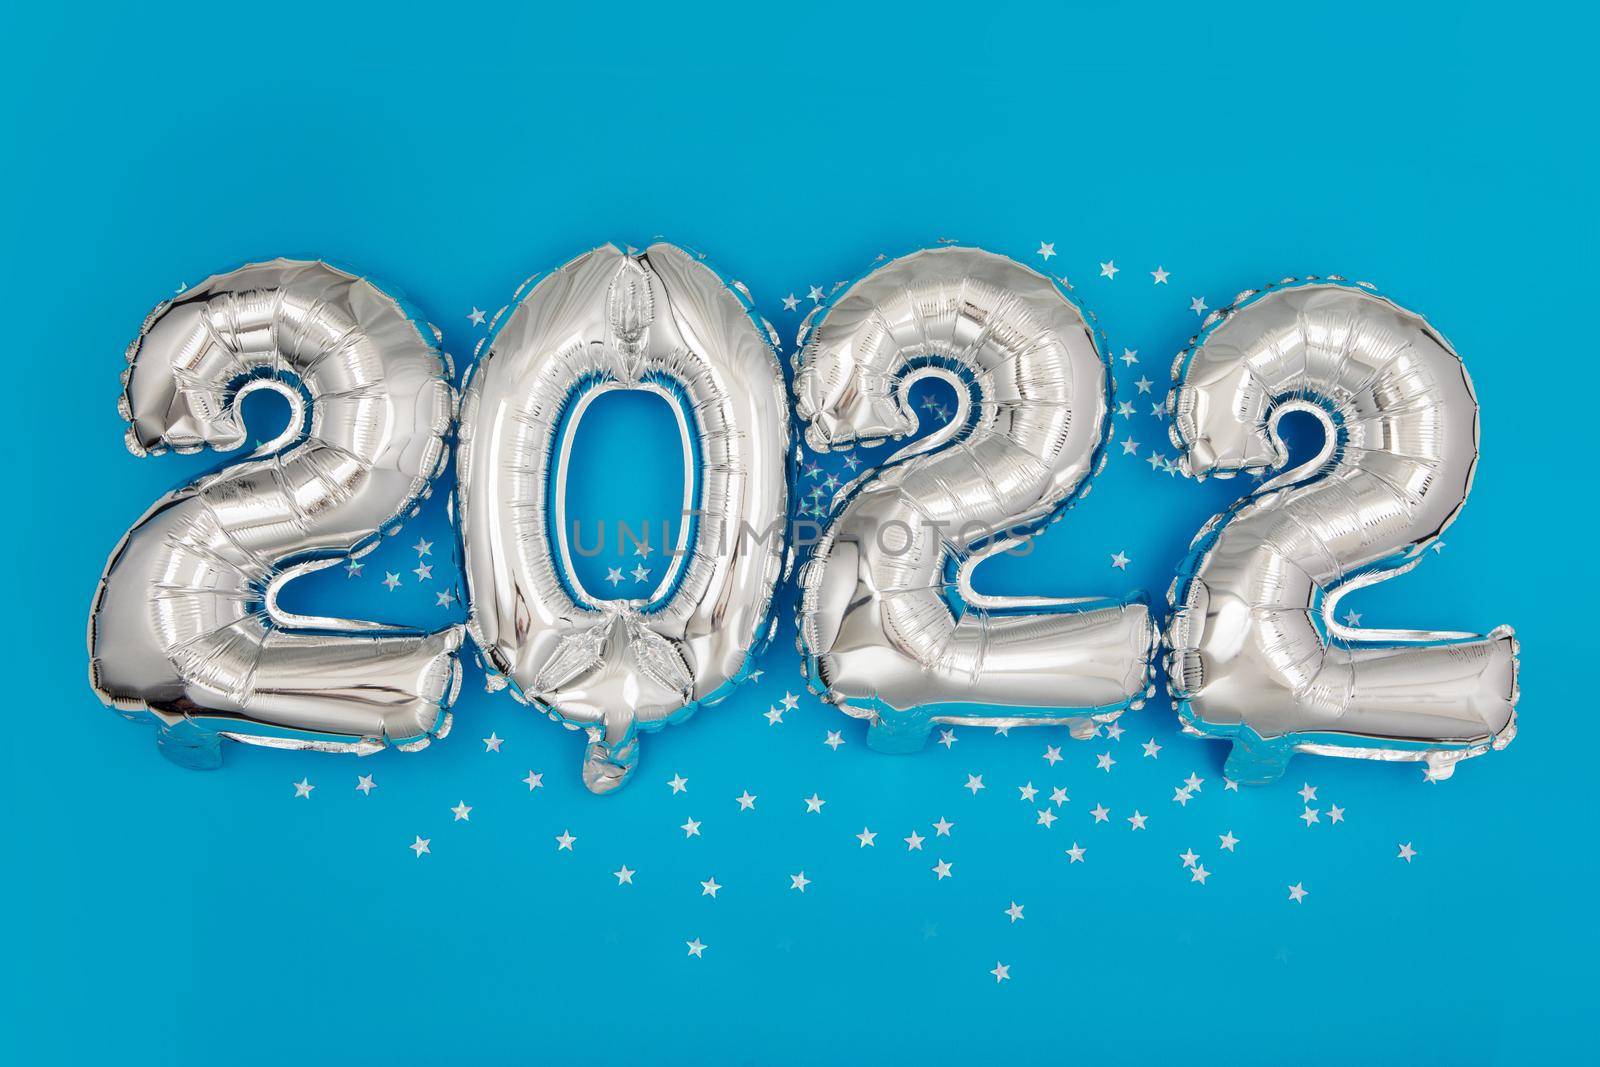 Silver balloons showing 2022 year on blue background by Demkat